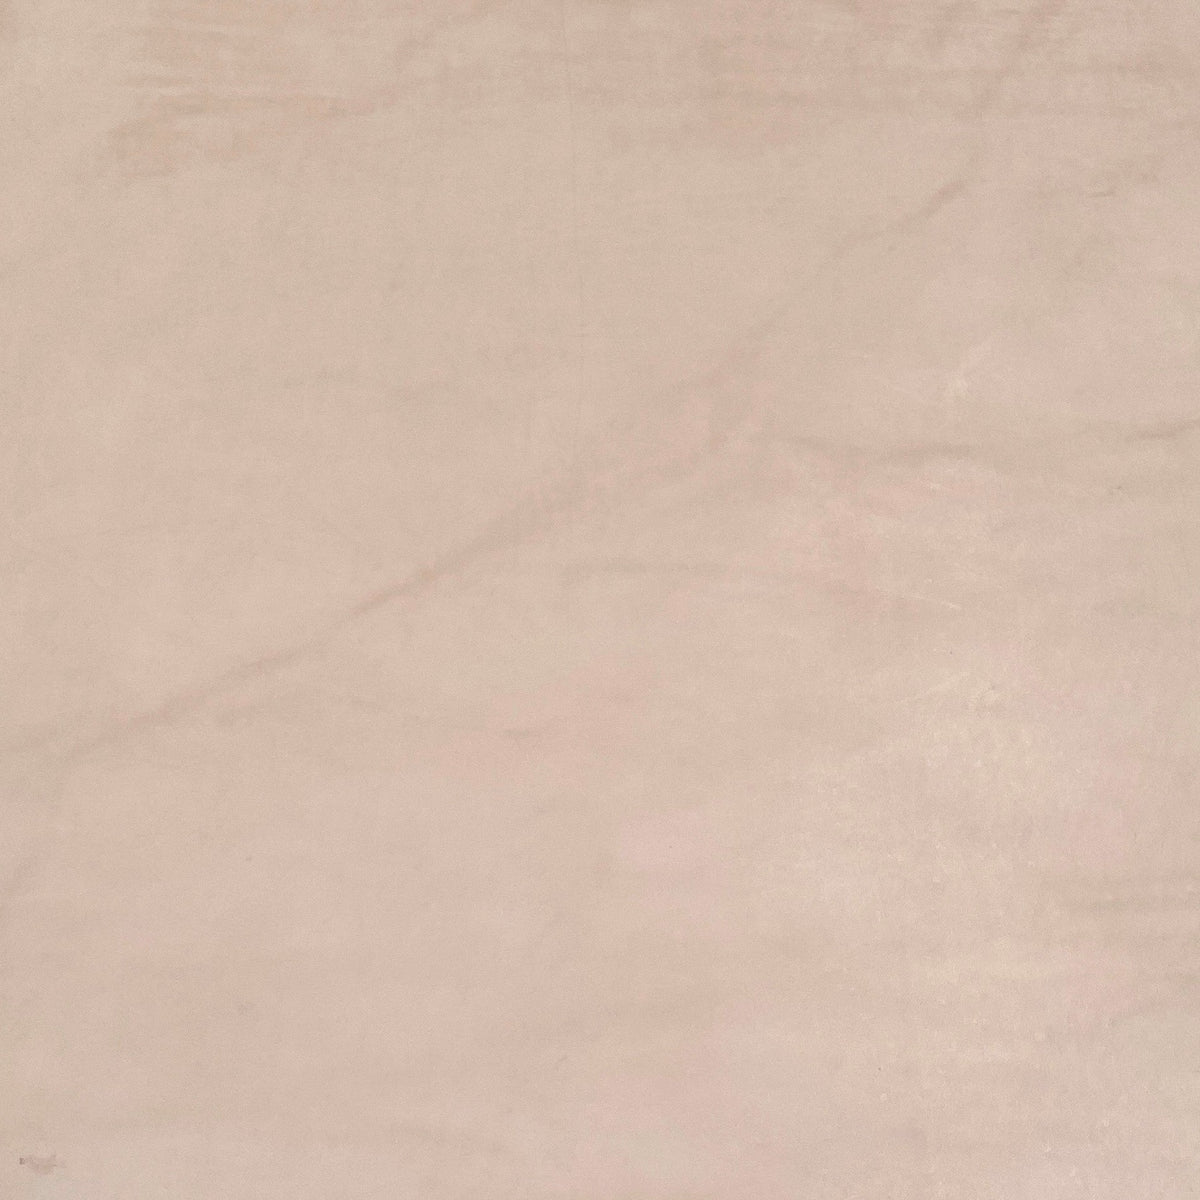 Russet Veg Tan Double Shoulders | 1.0, 1.5, 2.0, 2.5, 3.0, 3.5 mm | 12 sq.ft | From $175 ea.